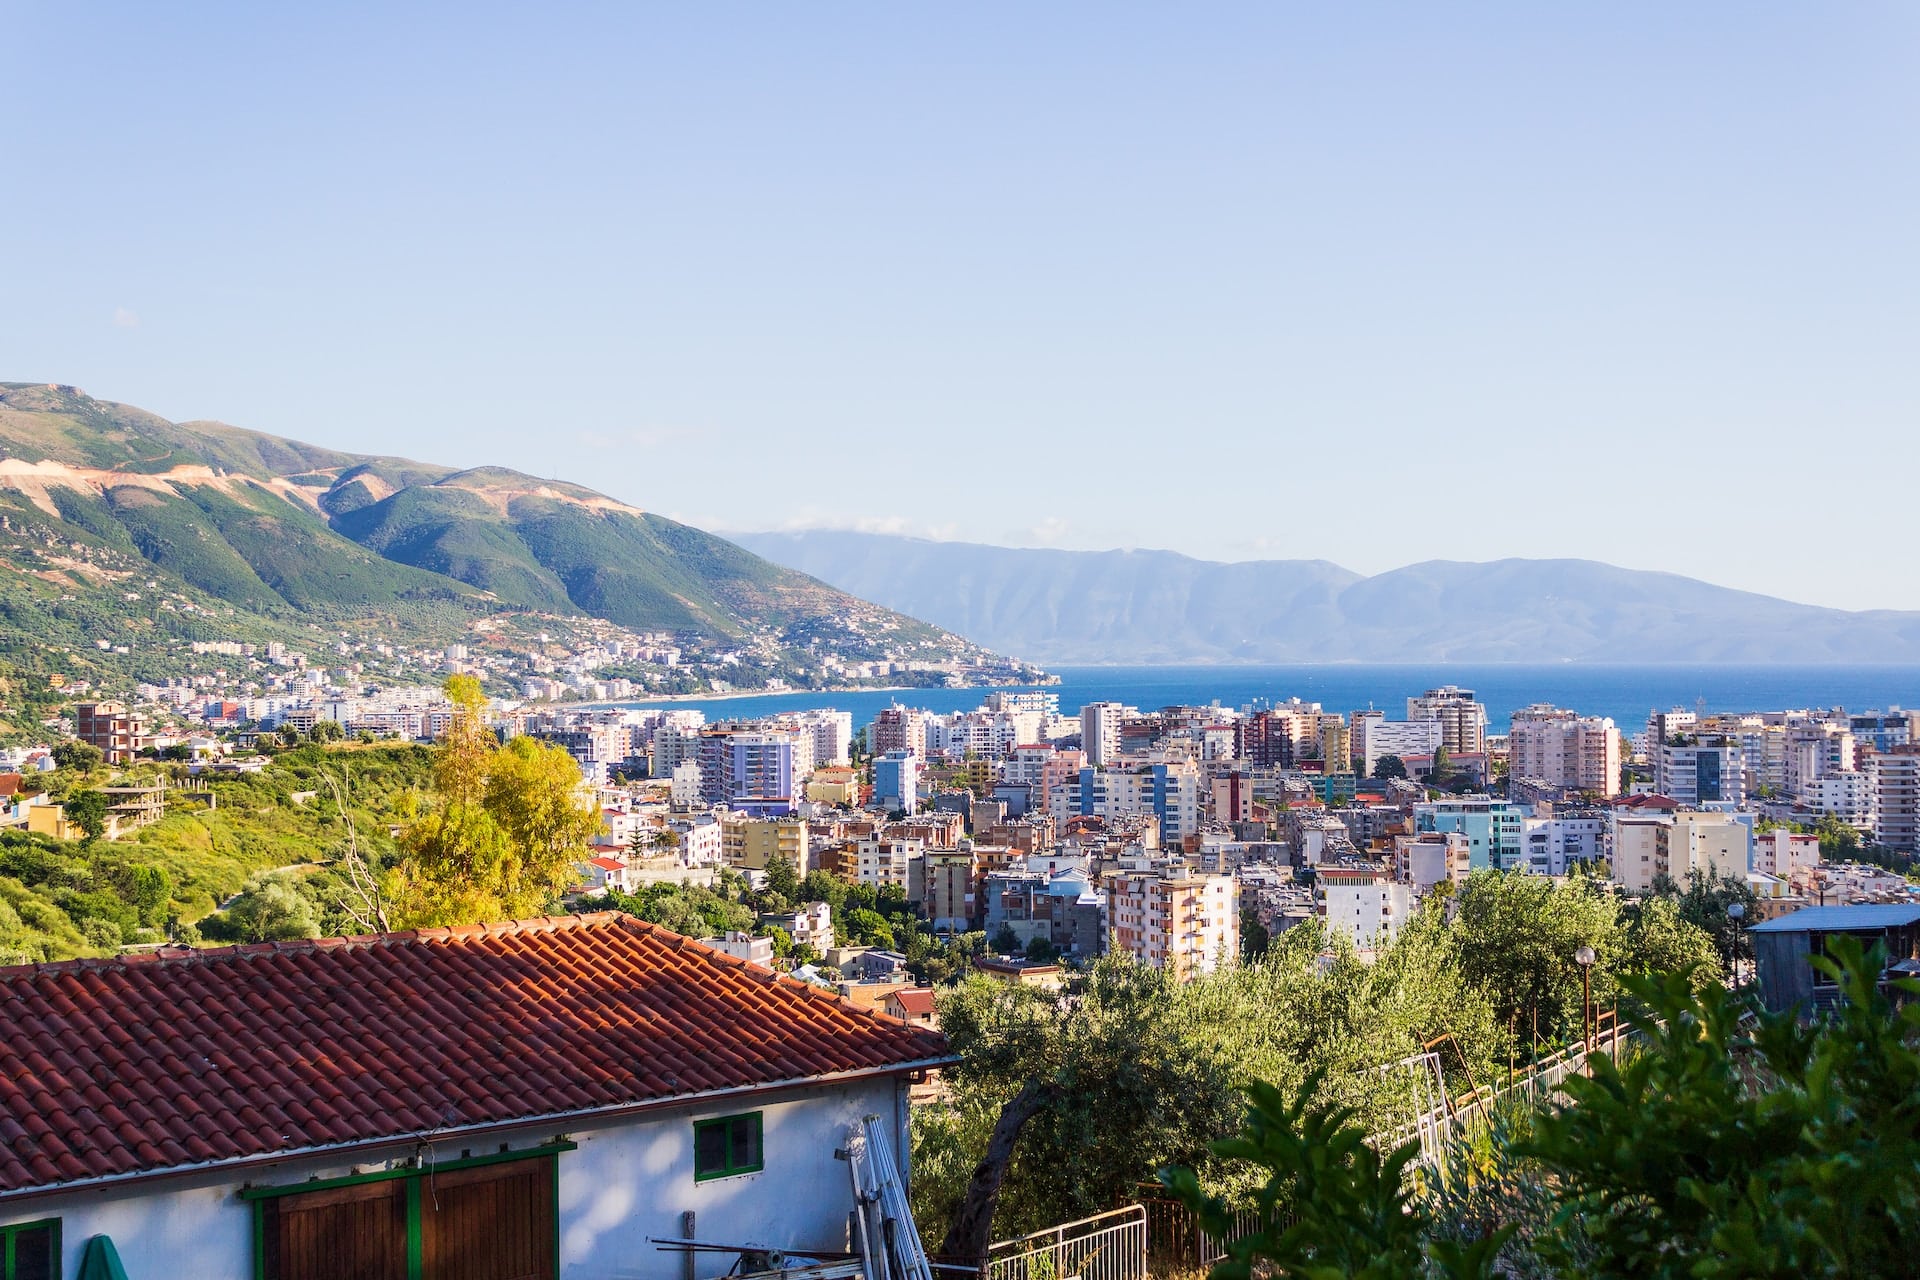 vlore albania places to visit